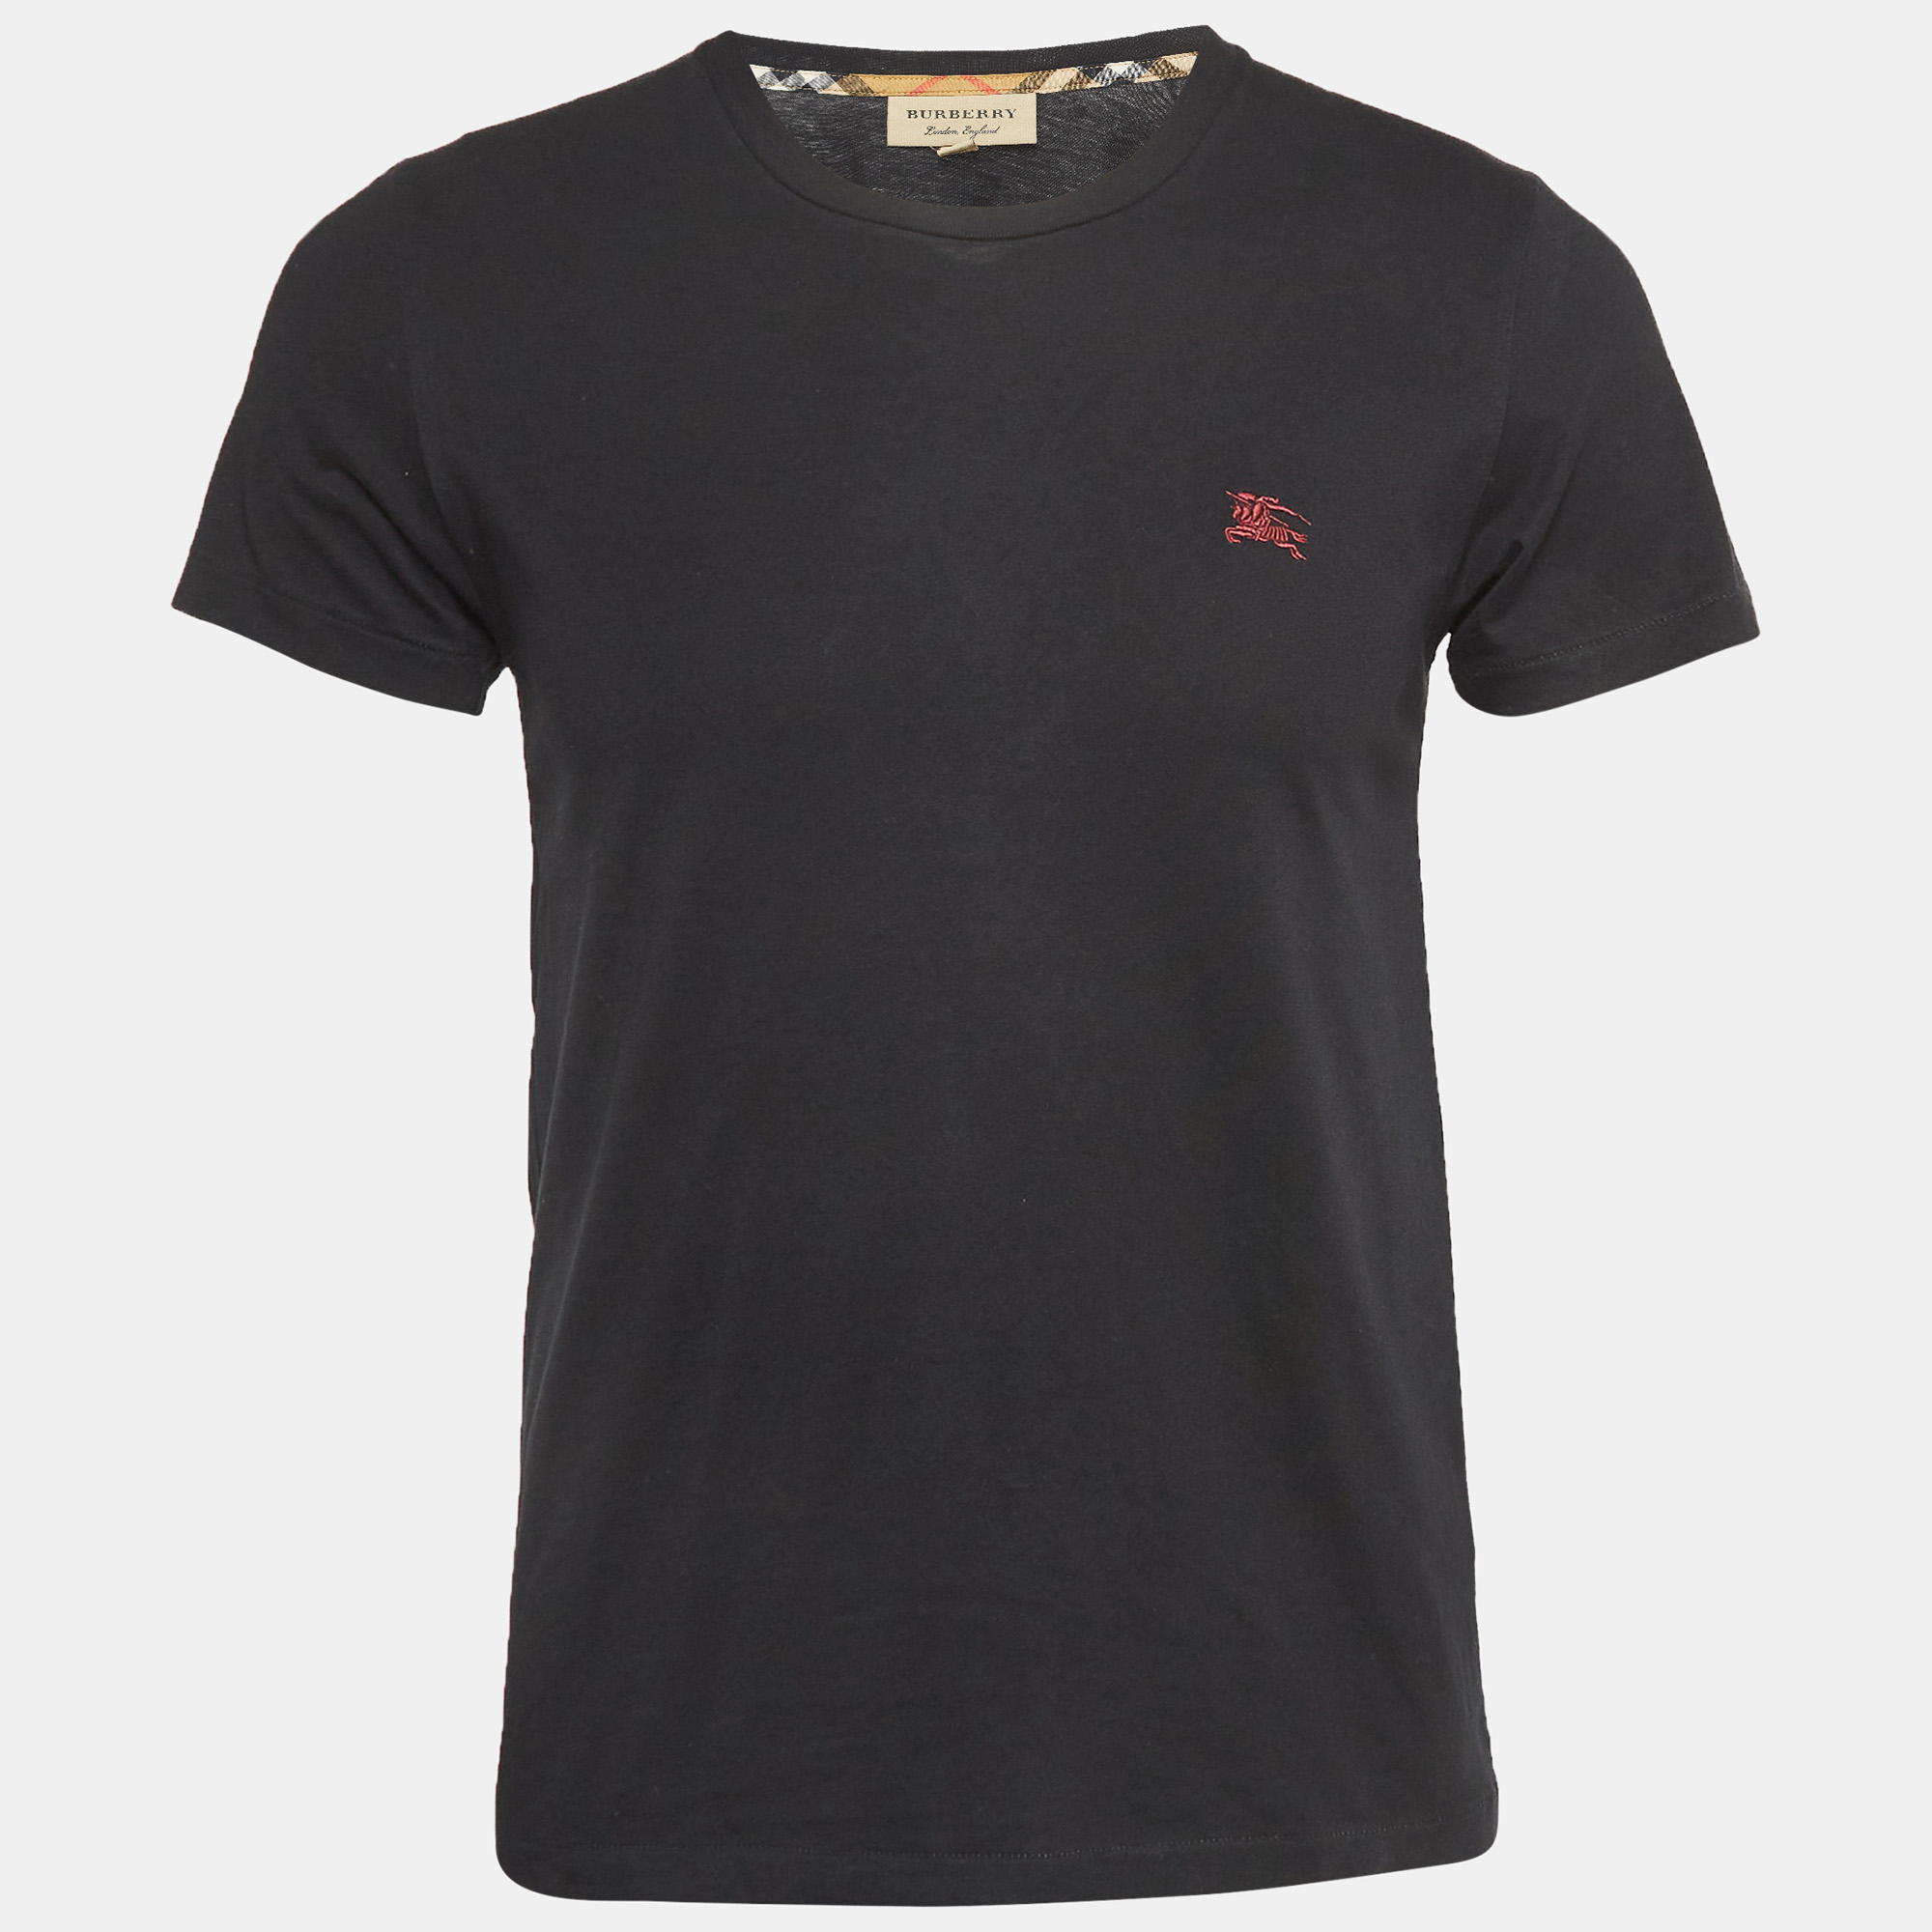 A perfect combination of comfort luxury and style this designer t shirt is a must have piece Made from quality materials the creation can be styled with denim pants and sneakers for a cool look.